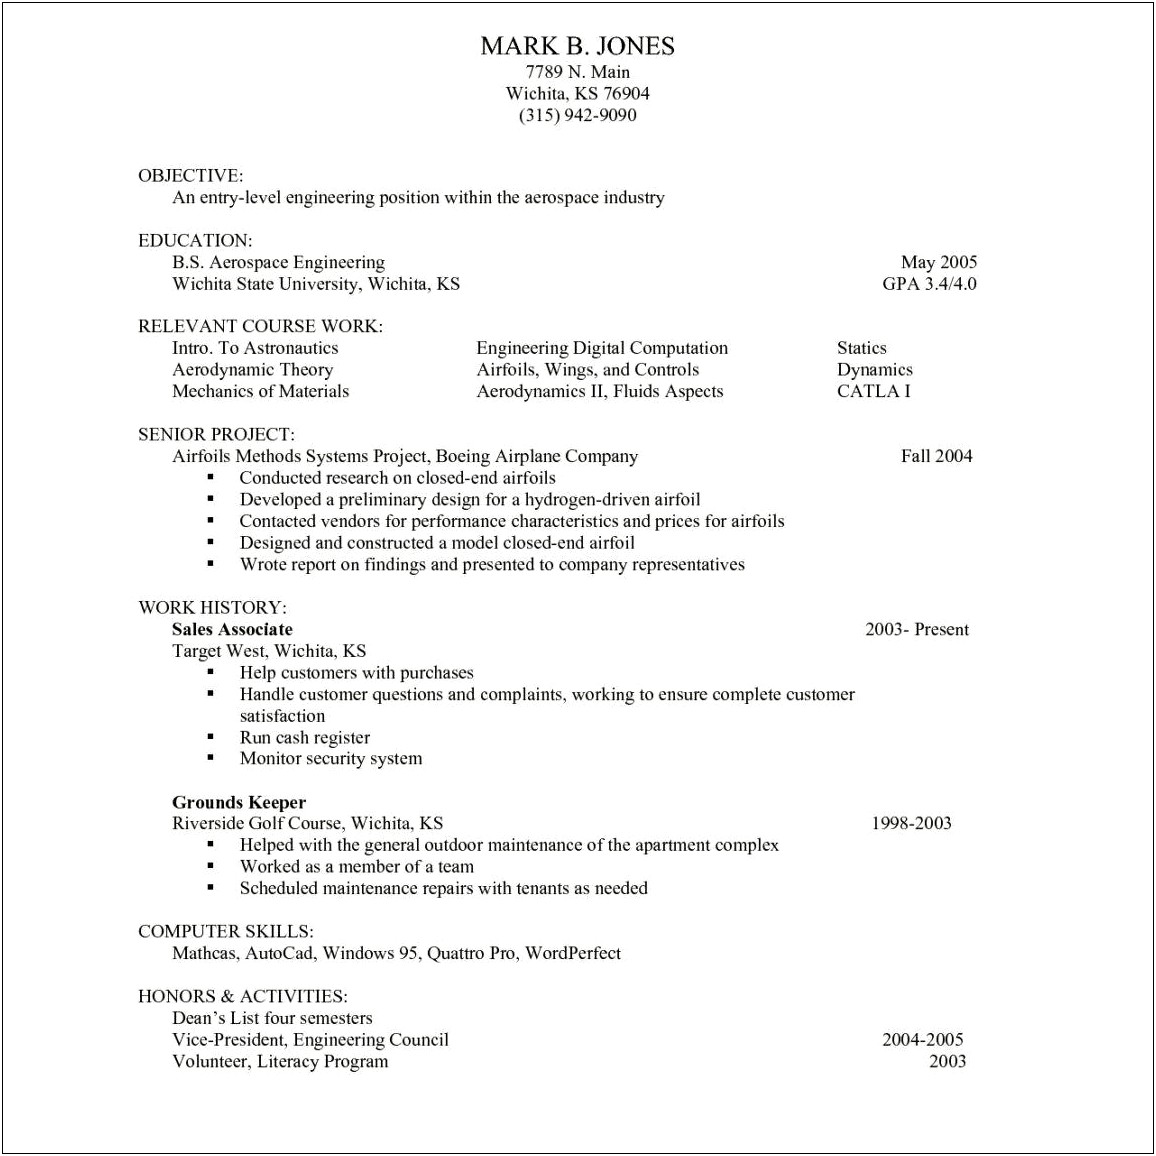 Resume Template With No Experience Example